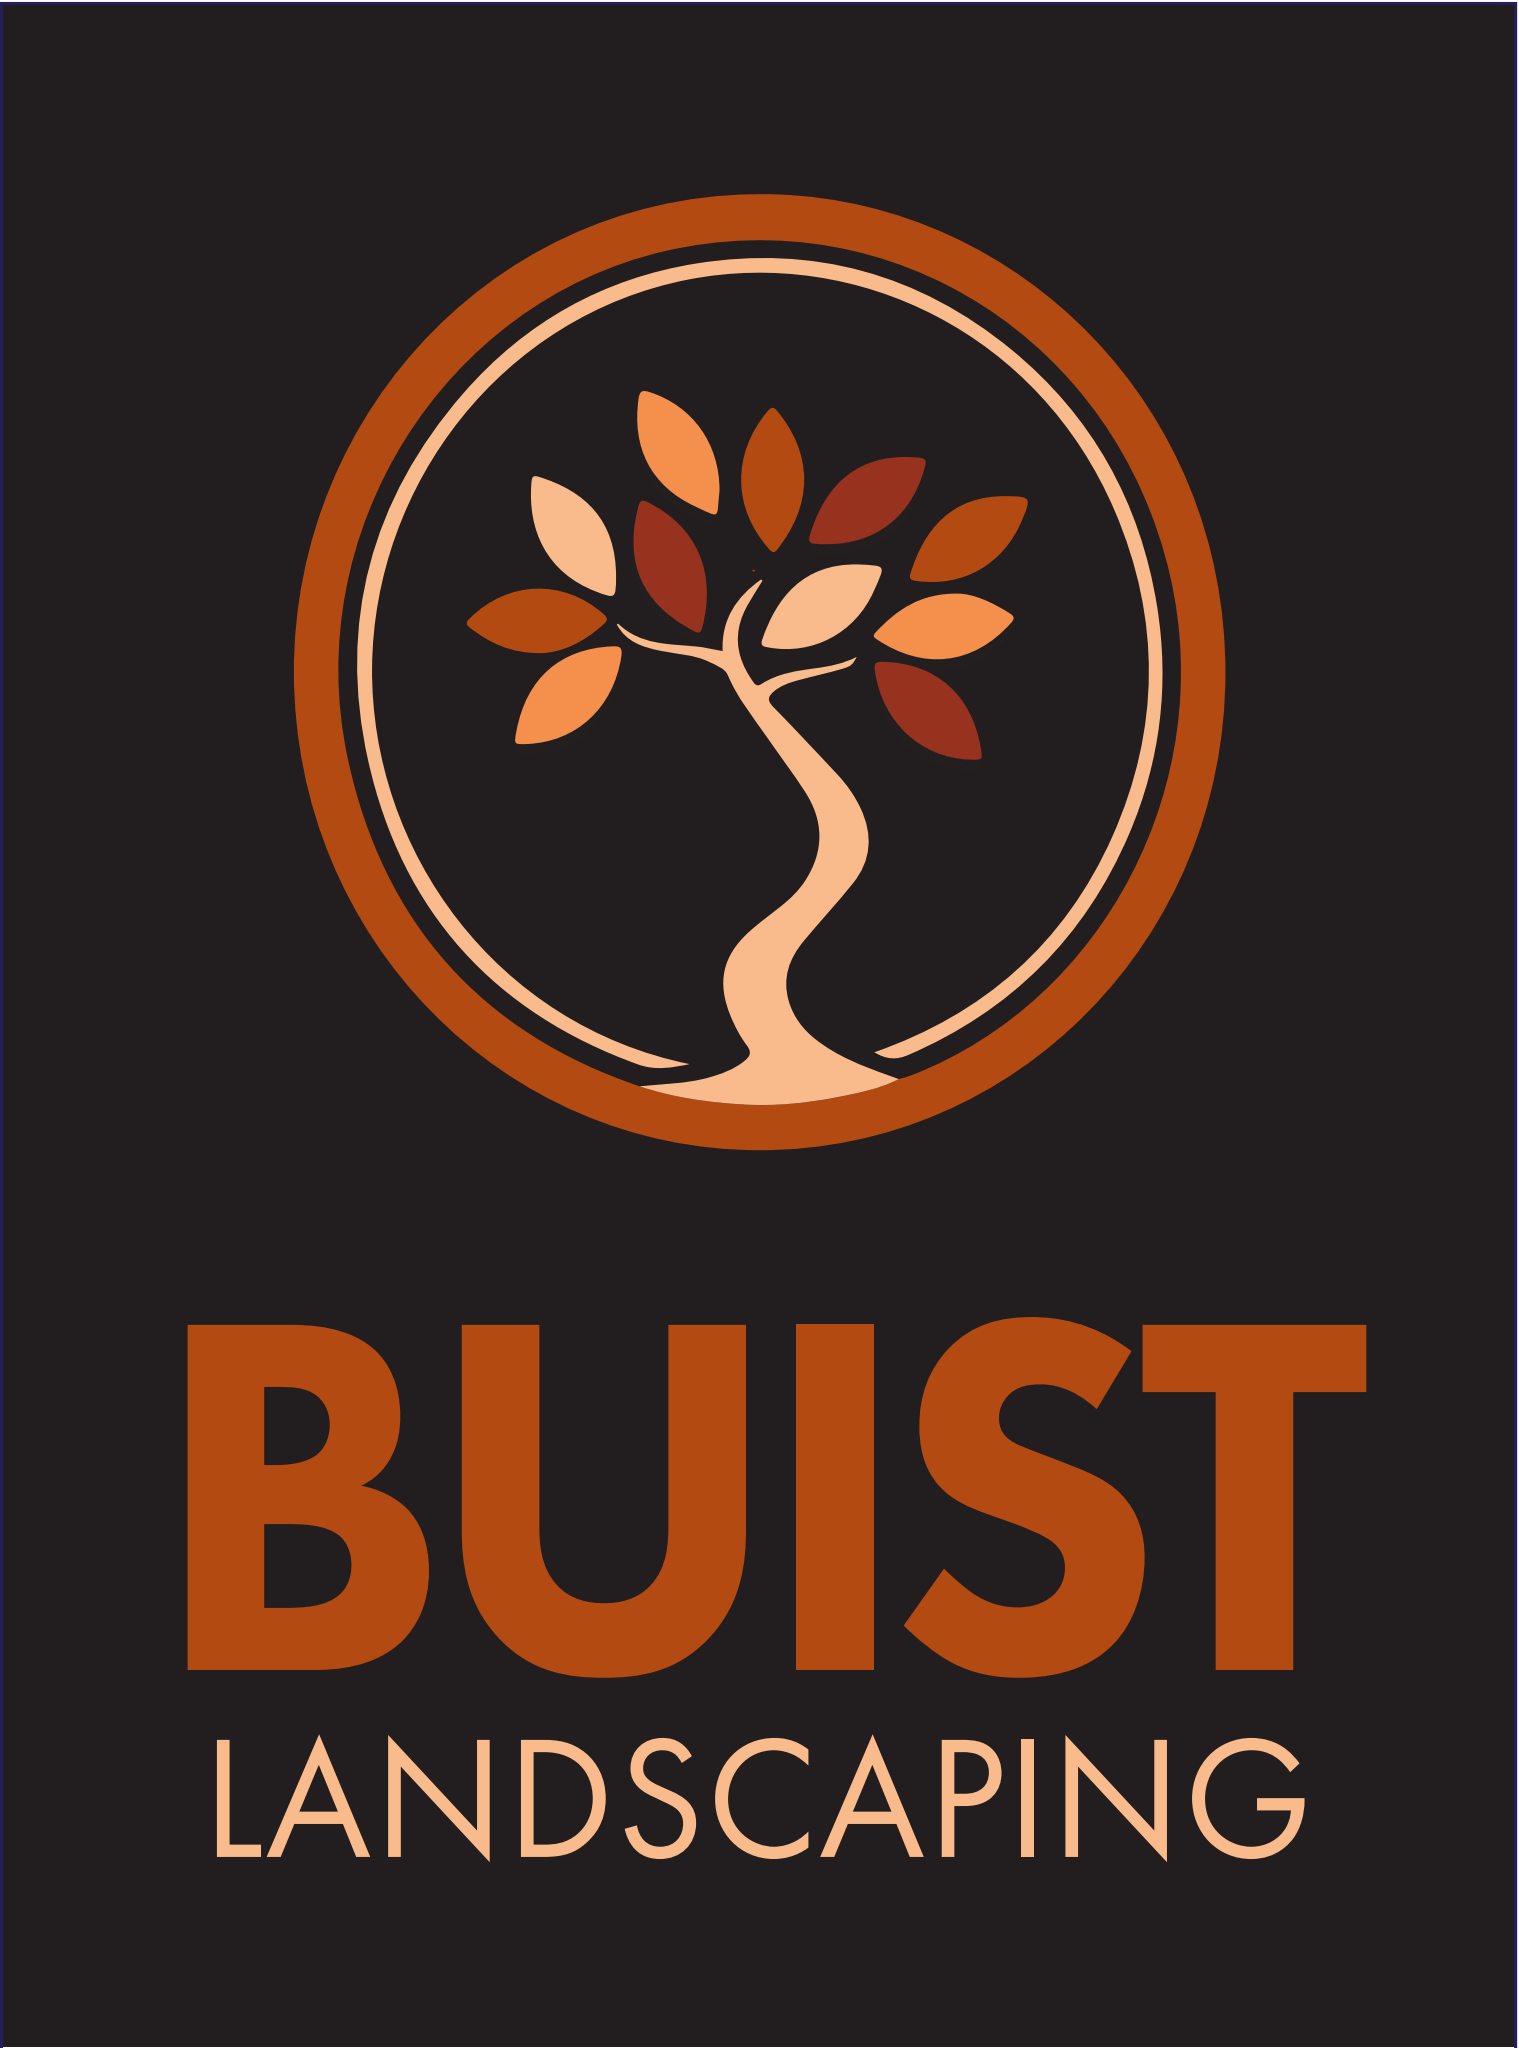 Buist Landscaping